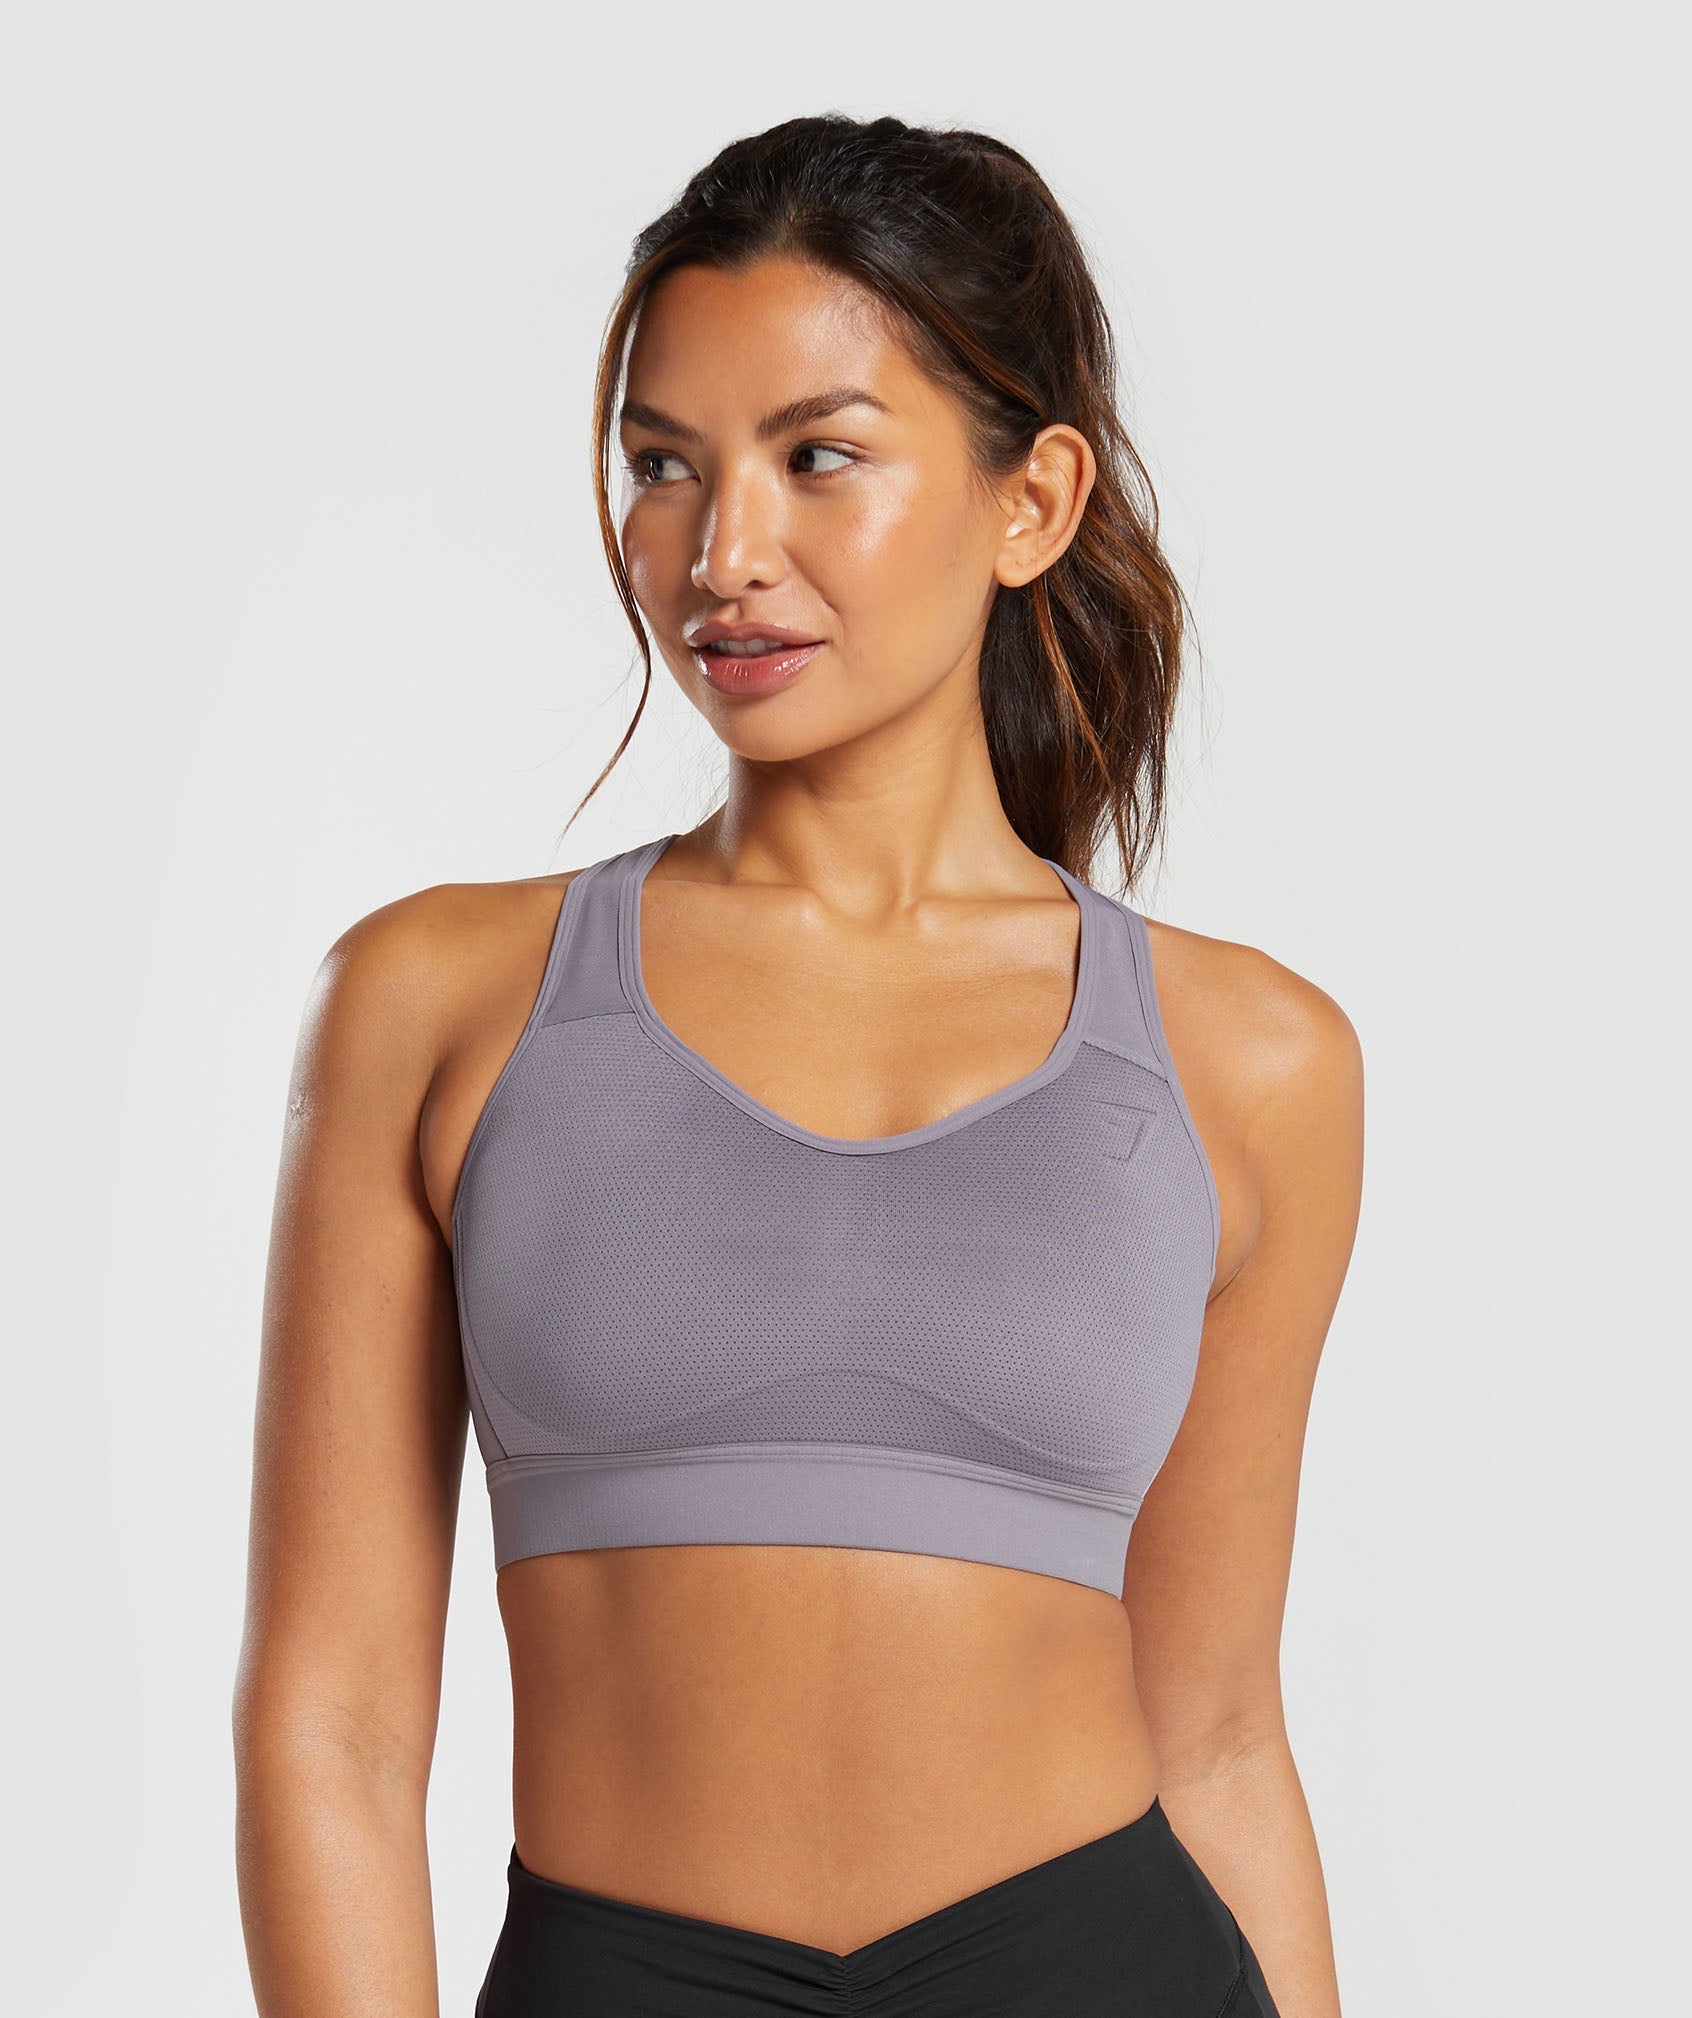 Gymshark Black and Gray Sports Bra Size Small  Gray sports bra, Sports bra  sizing, Black and grey